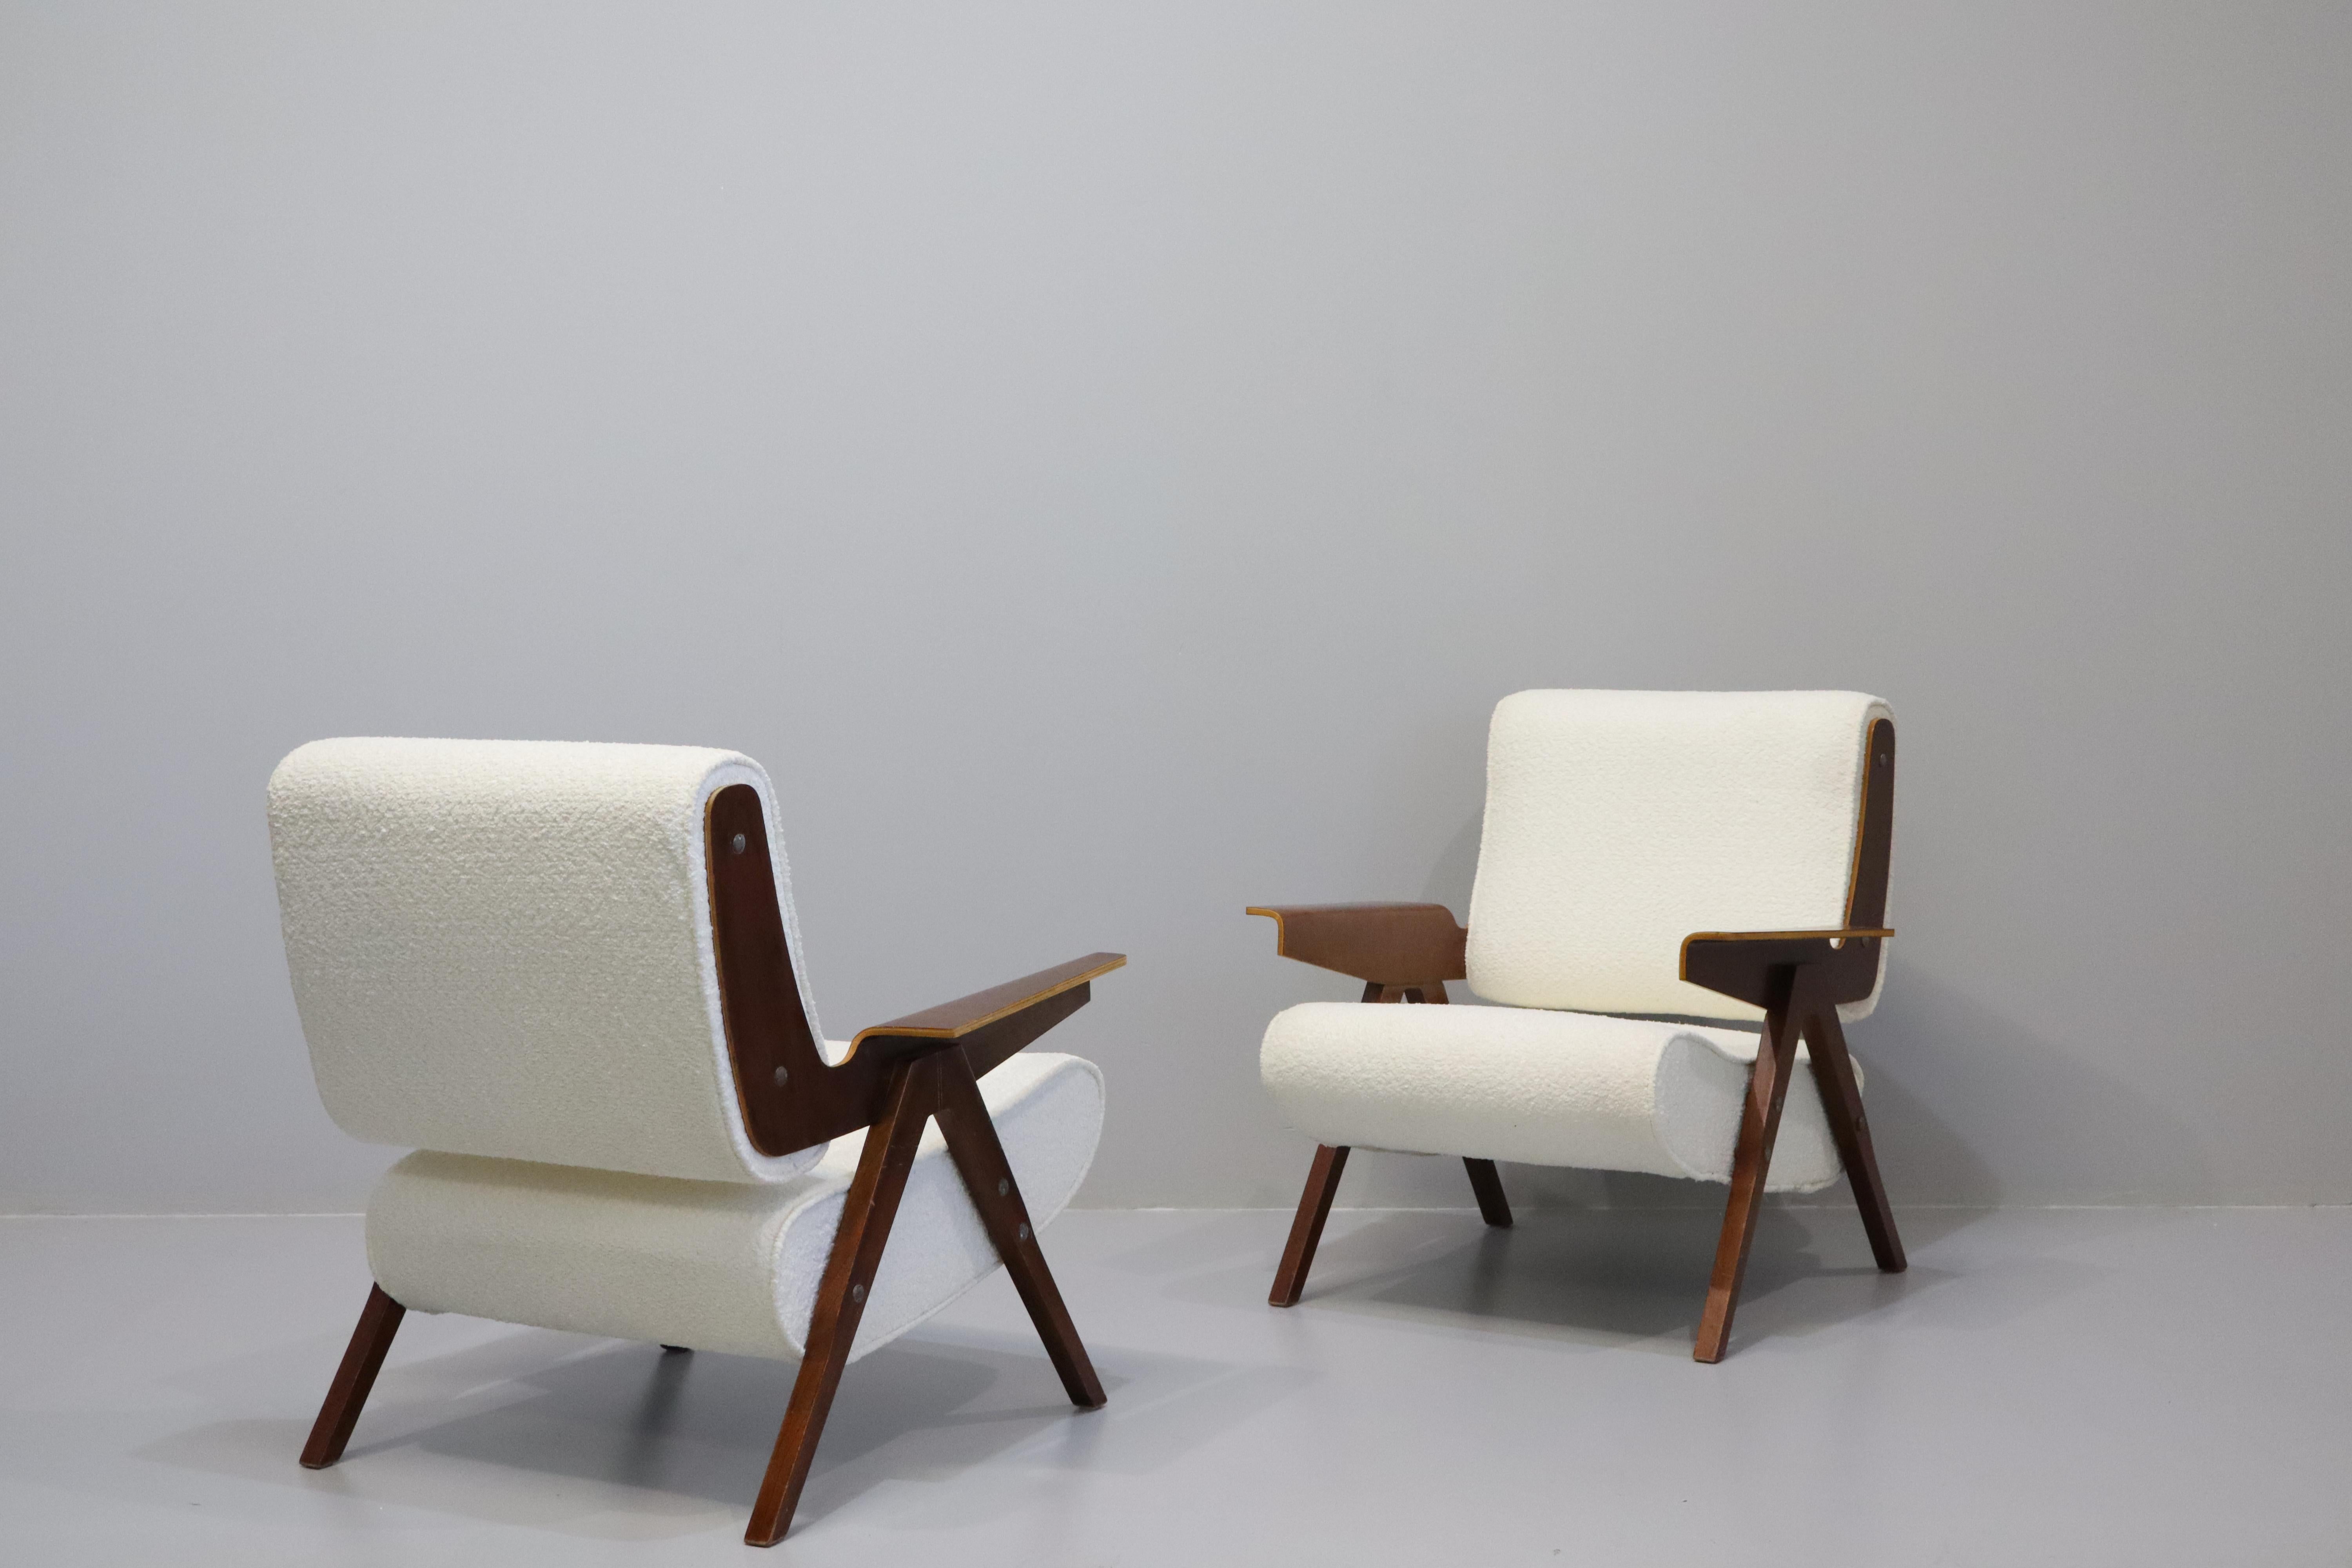 Pair Of Gianfranco Frattini Model 831 Lounge Chairs For Cassina, 1950s In Excellent Condition For Sale In Rovereta, SM